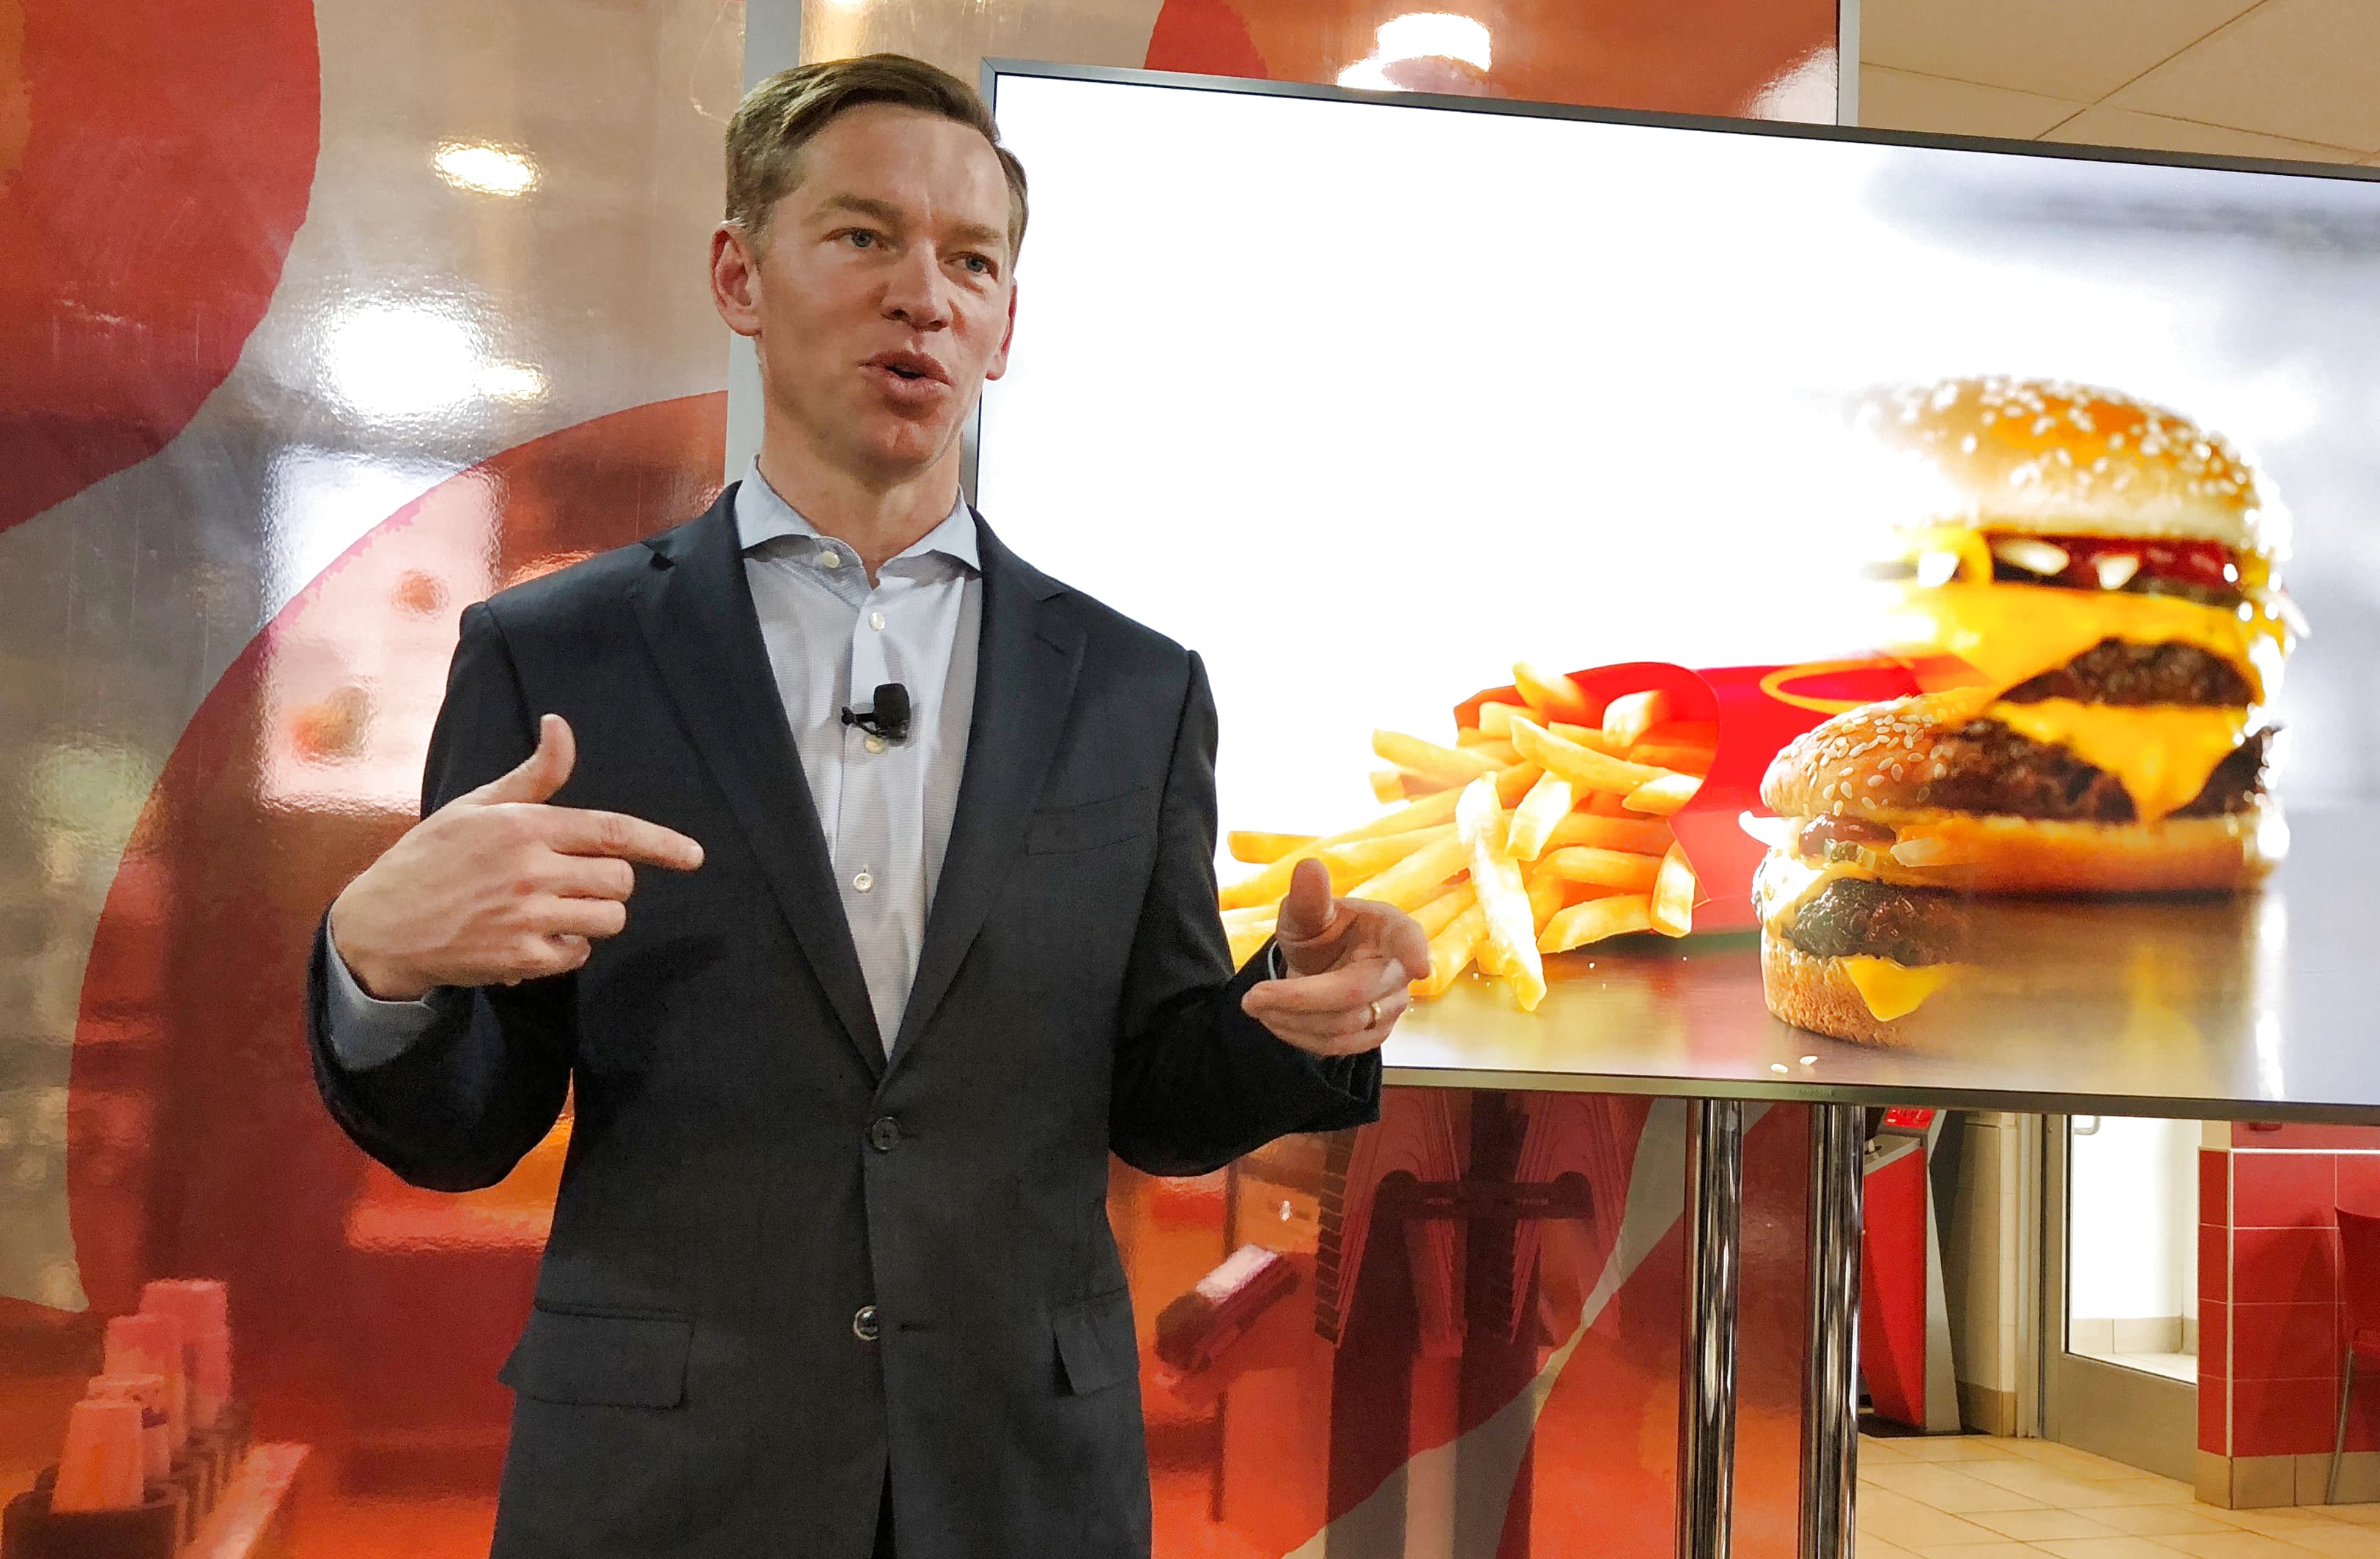 From Son of McDonald's Manager to $1 Billion Company